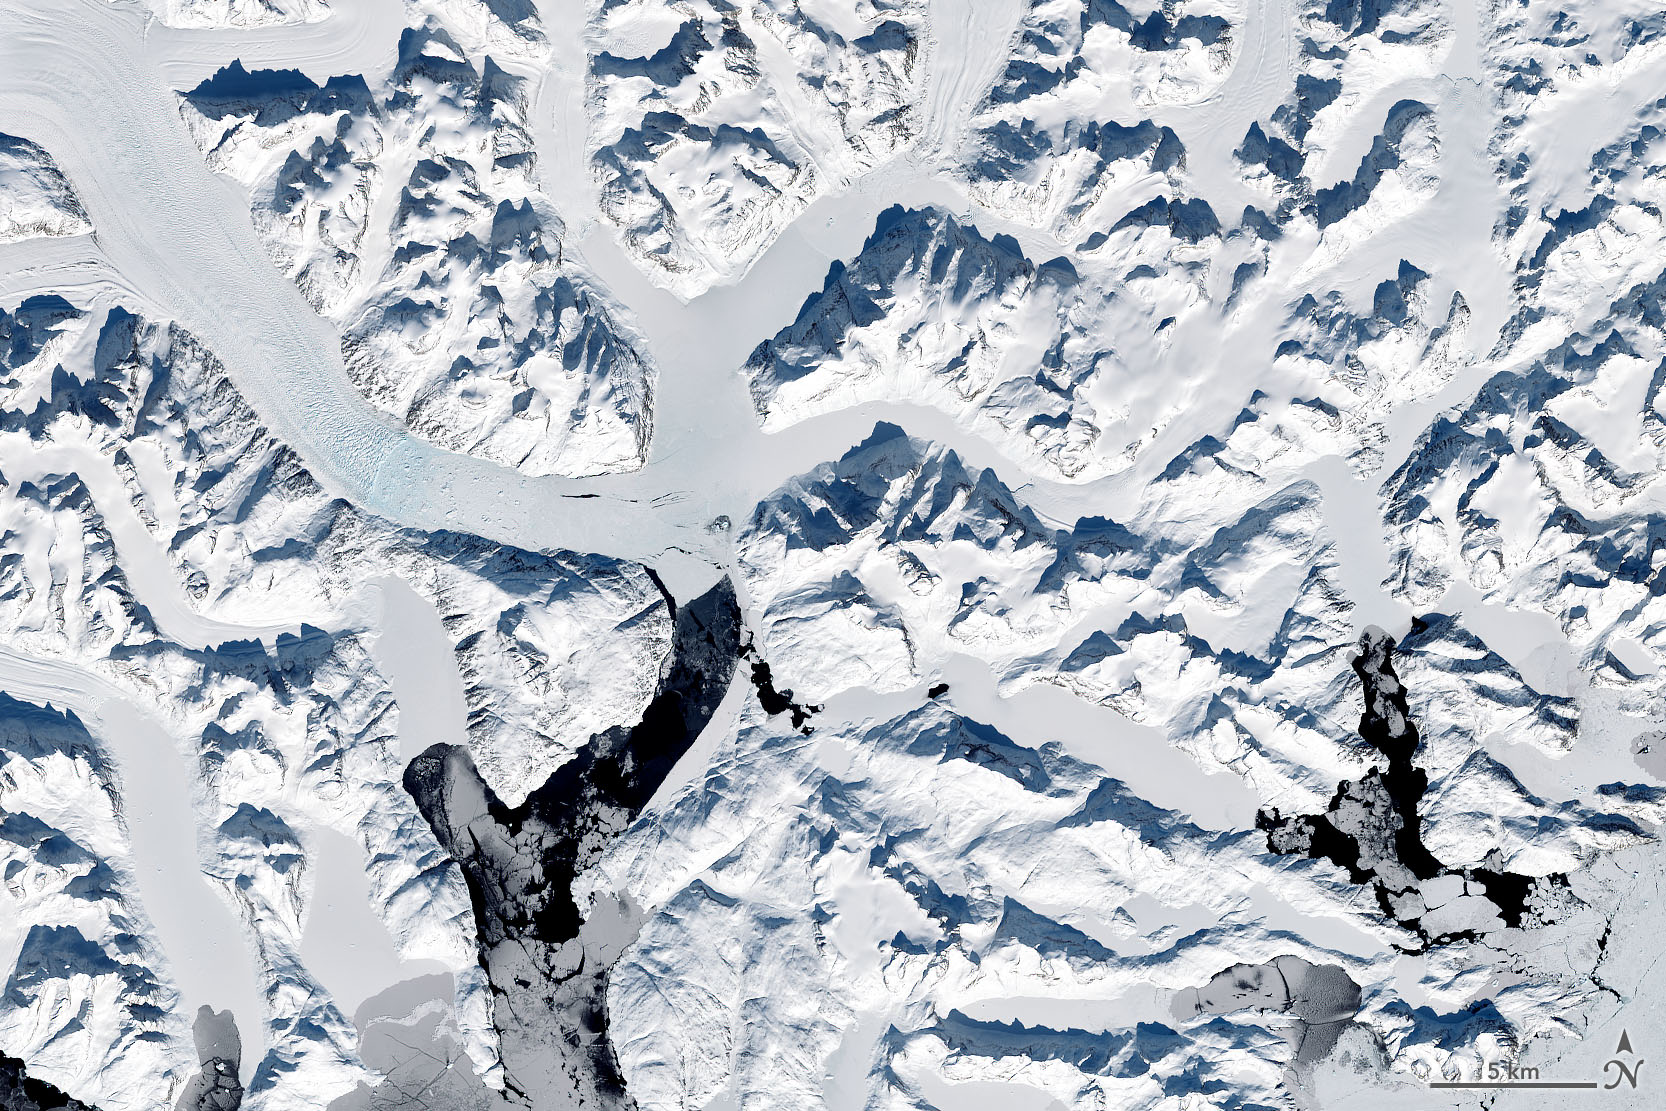 Satellite image of a fjord, a dark blue narrow body of water surrounded by ice covered mountains and thin ribbons of icy glaciers with light blue splotches of melt.